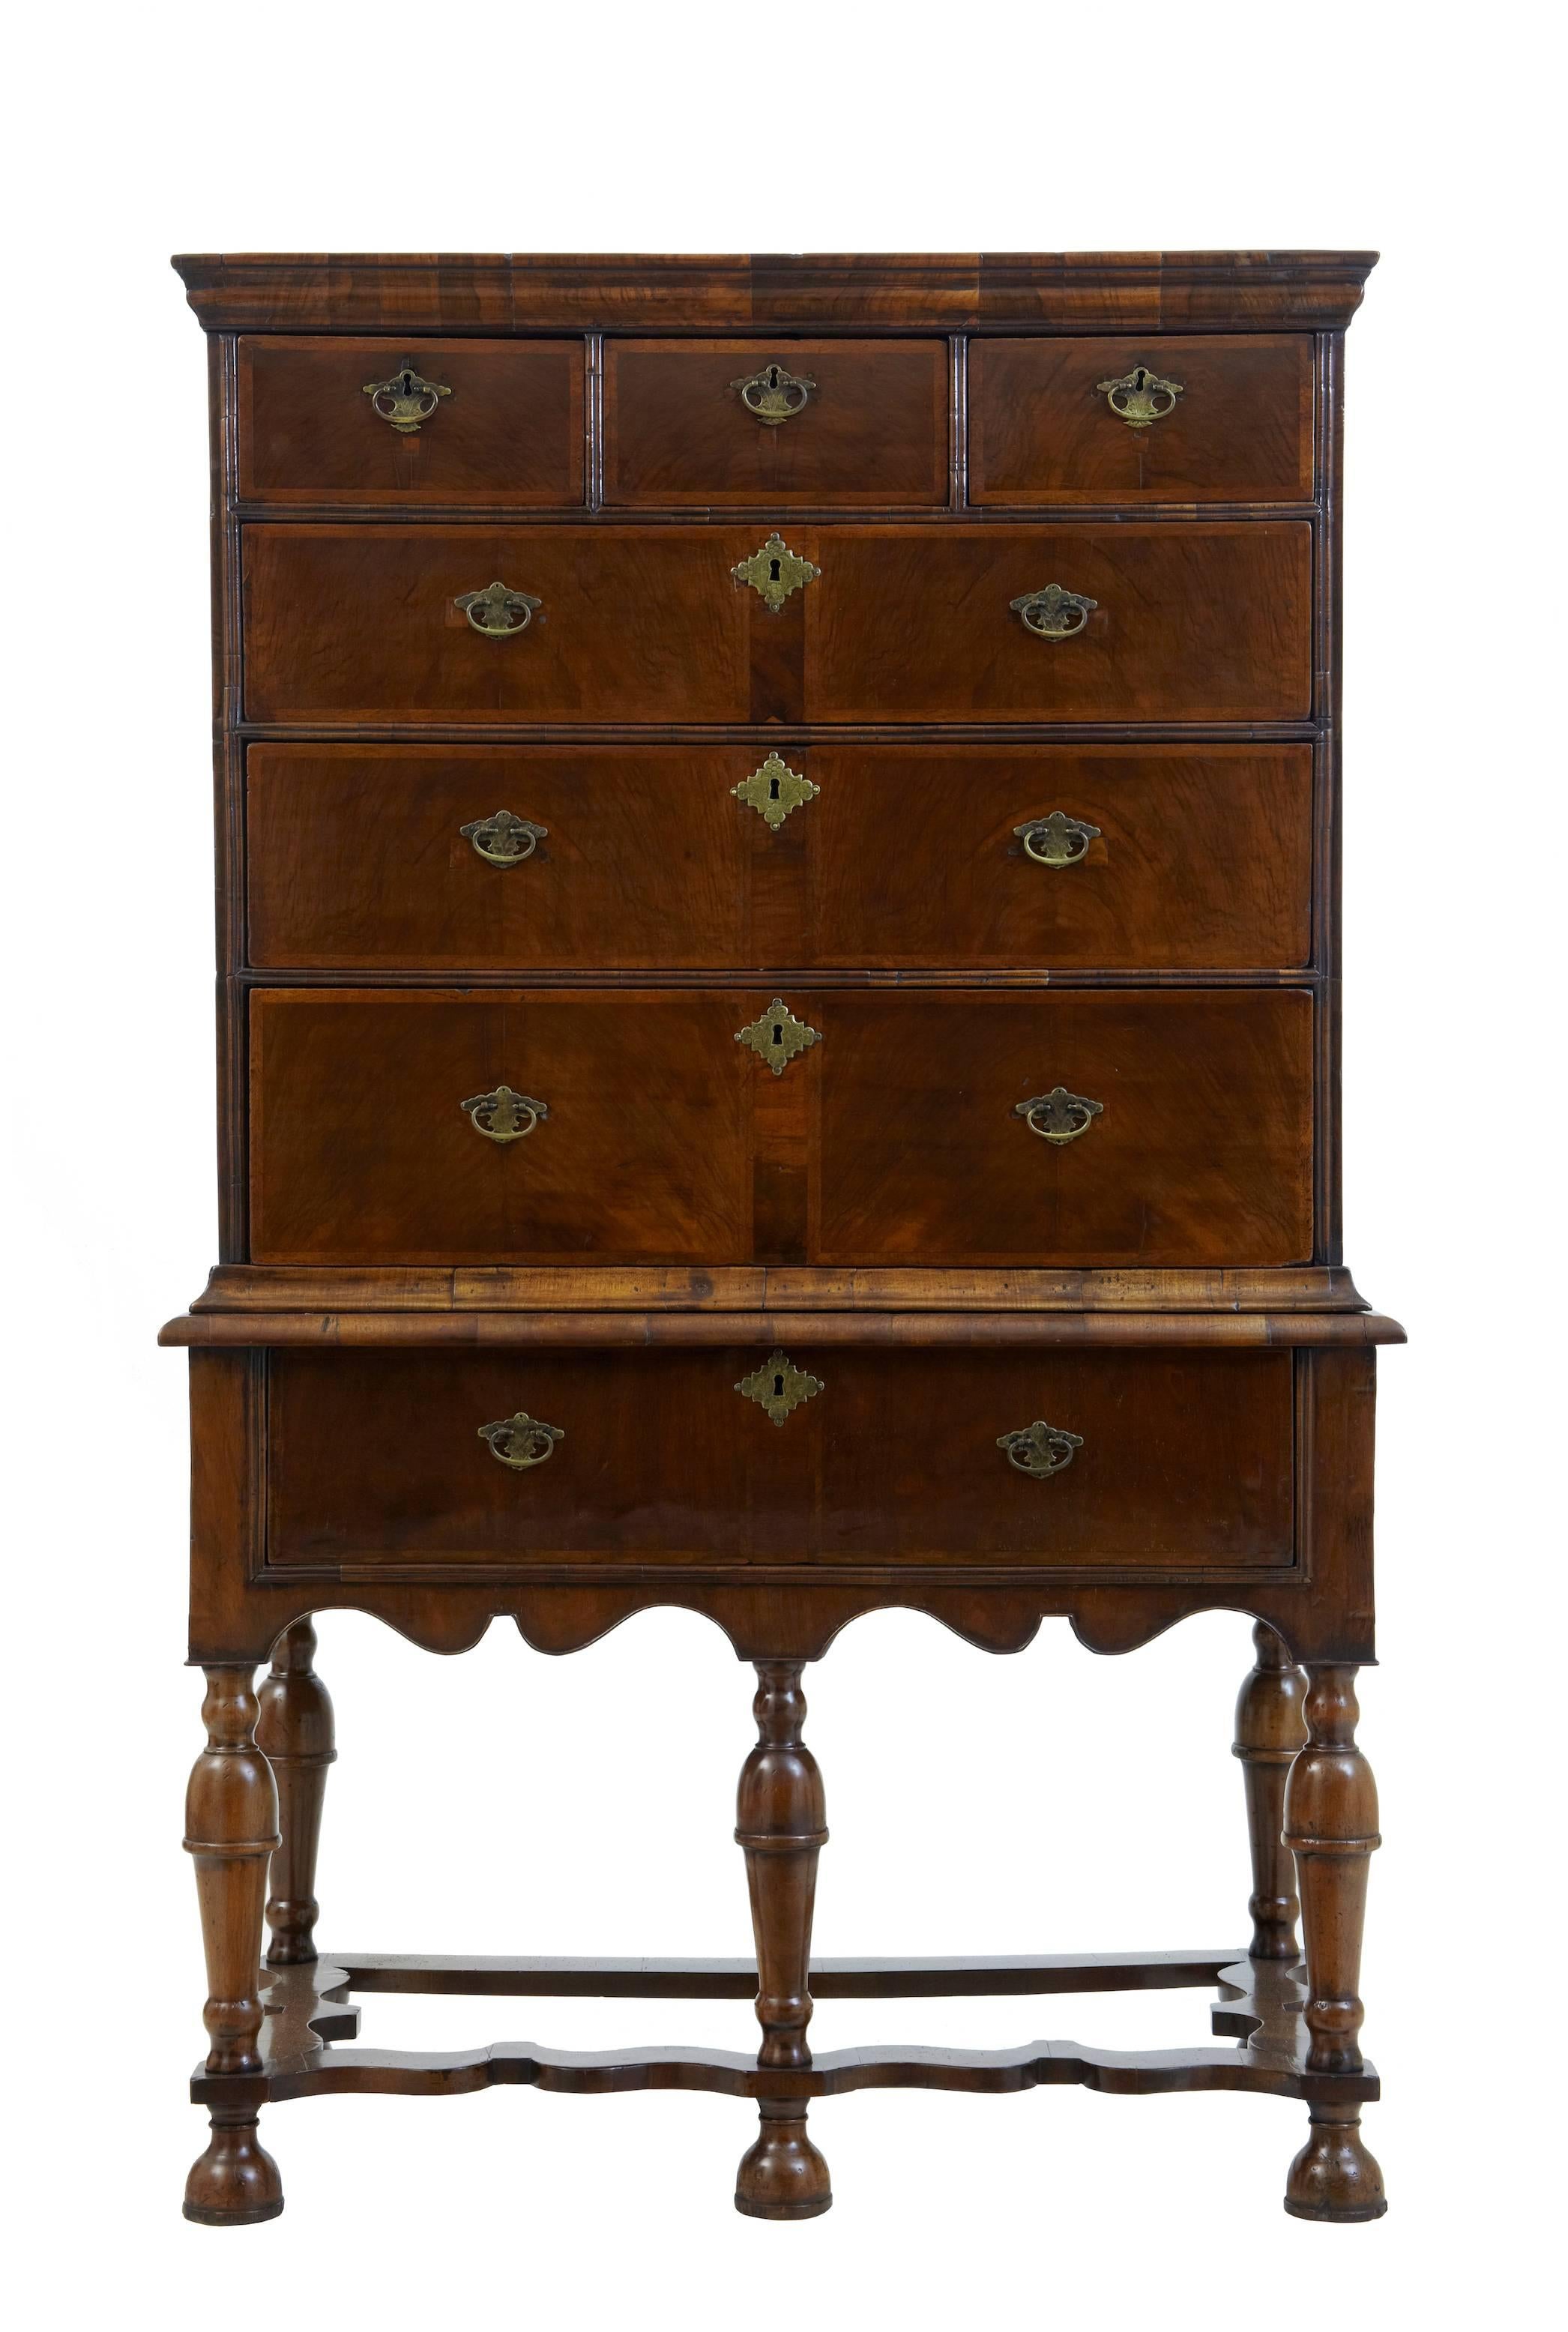 Superb restored chest on stand, circa 1700.
Consisting of two parts.
Top section with three short over three long drawers, crossbanded edges, later handles but original escutcheons.
Base with single drawer, standing on six turned legs united by